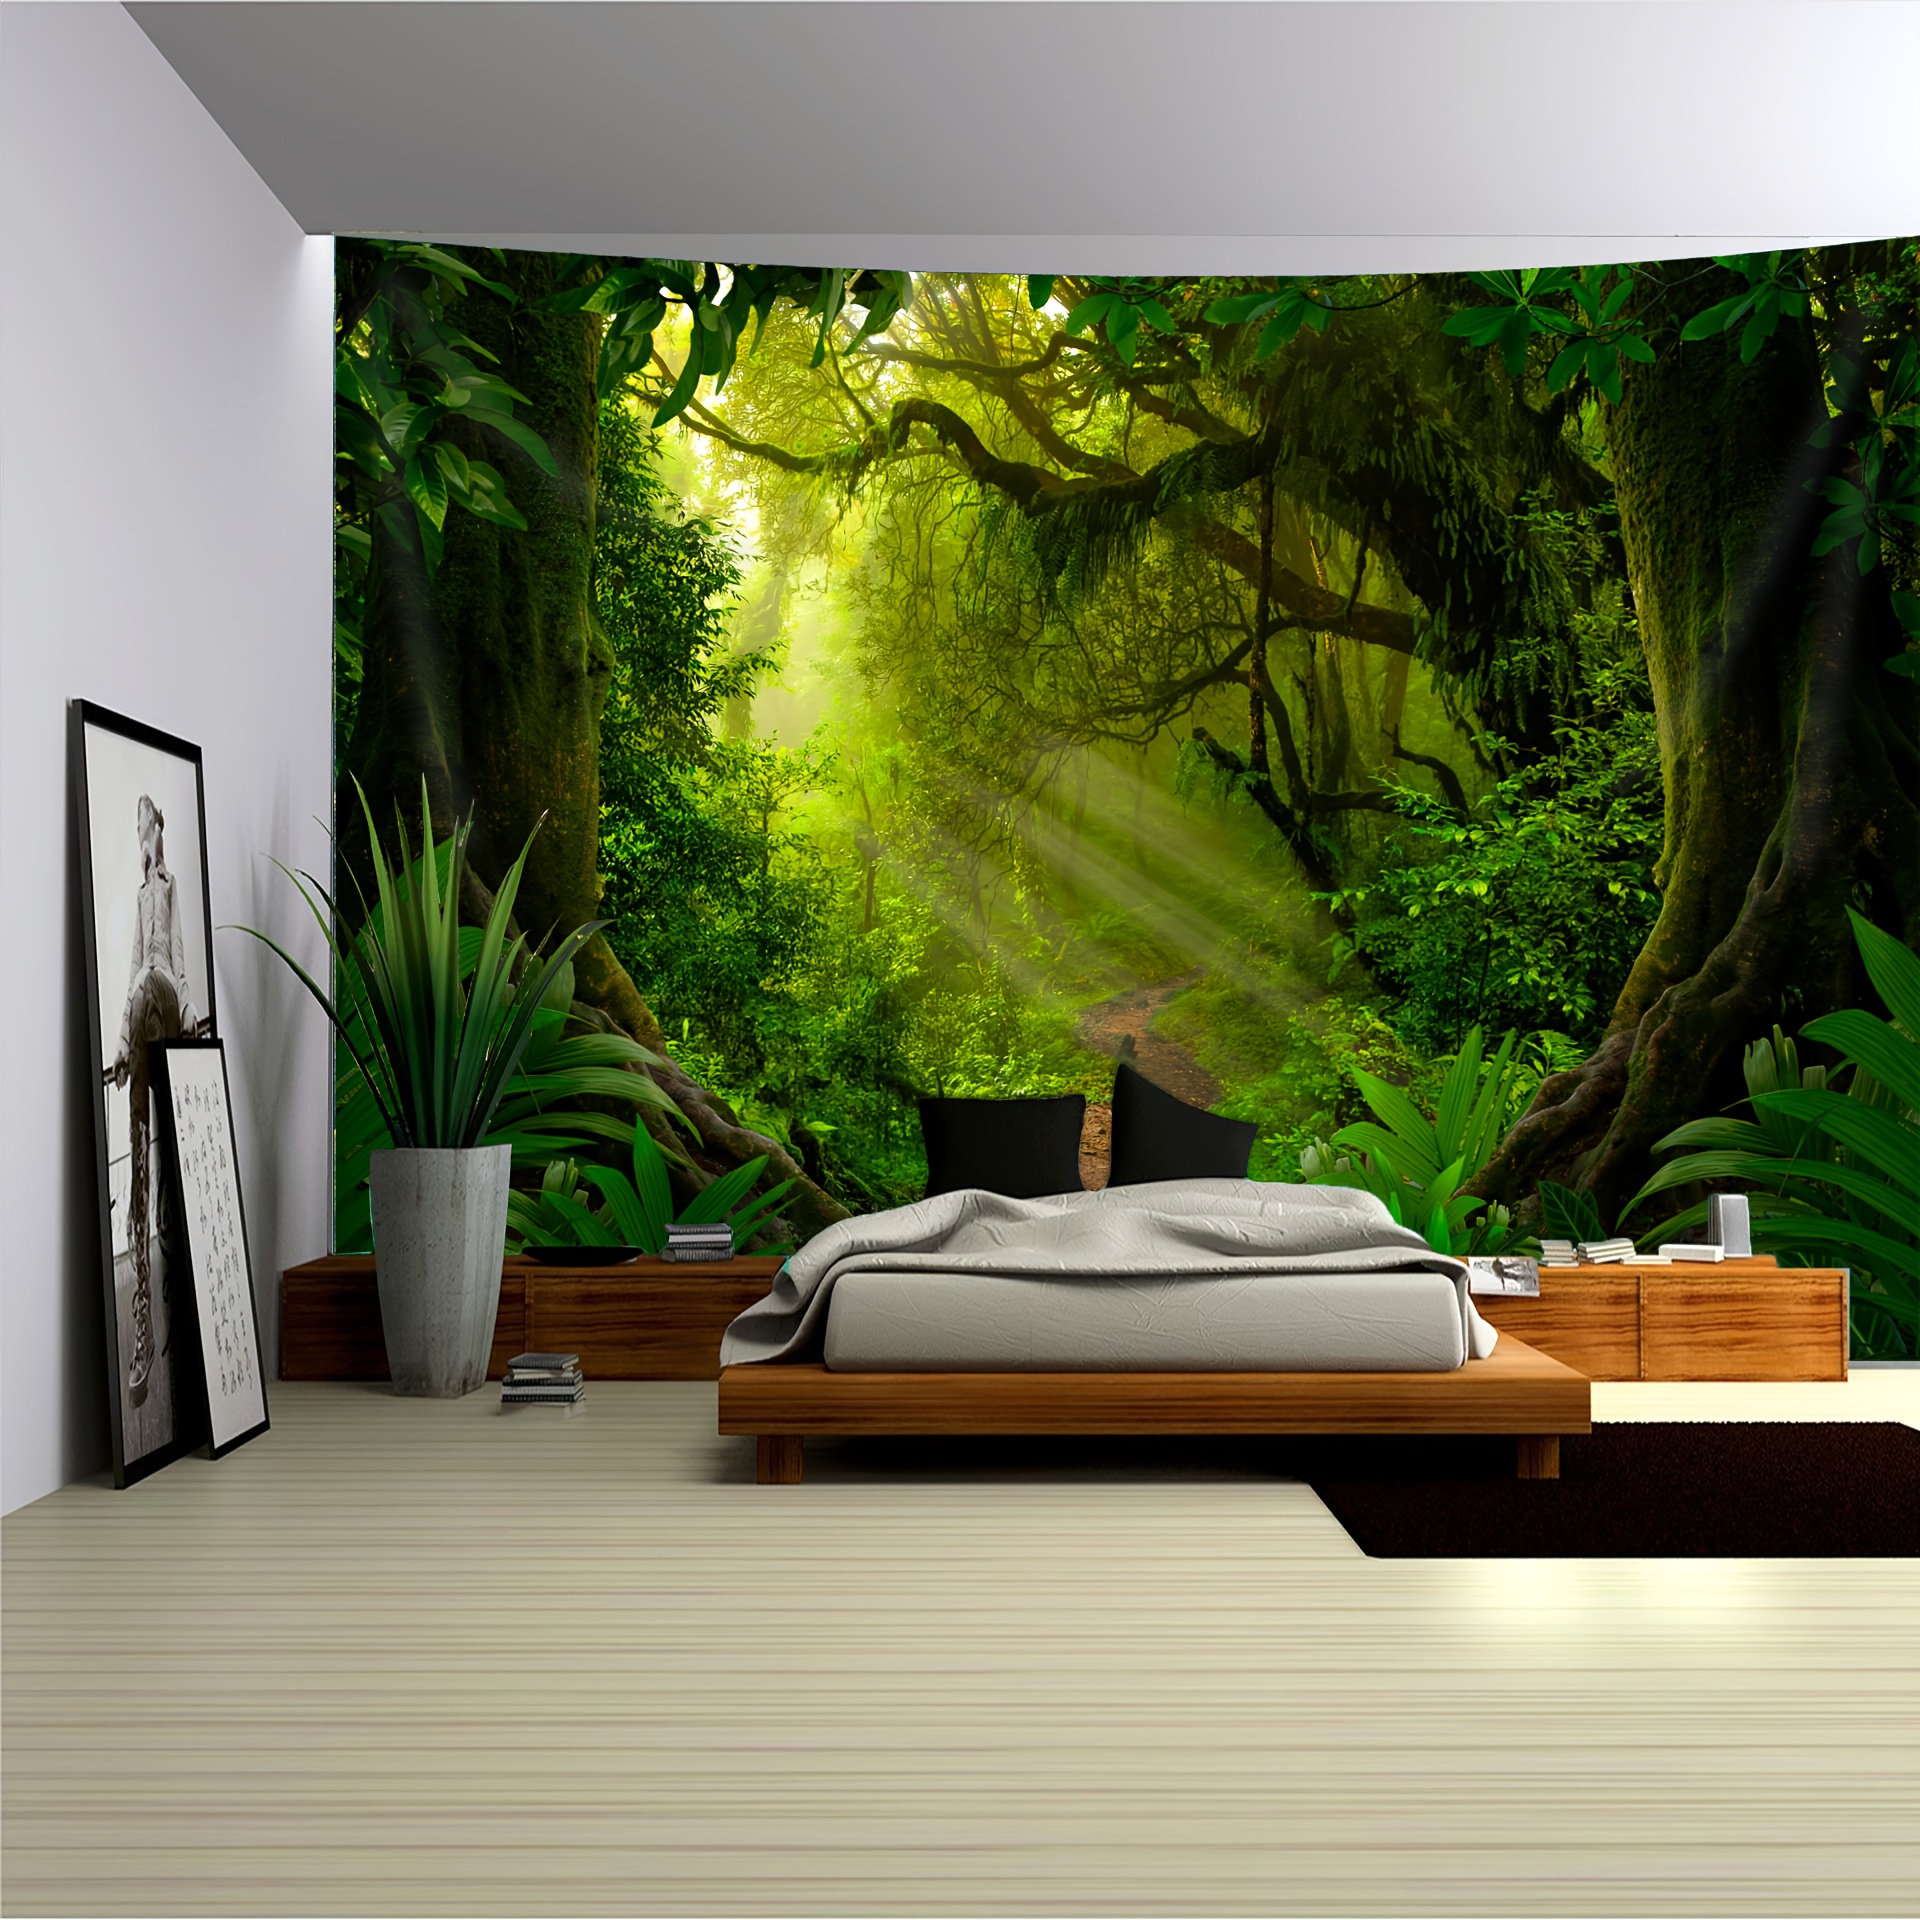 

Extra-large Mysterious Forest Sunshine Landscape Tapestry - Polyester Wall Hanging For Living Room, Bedroom, Office & Party Decor - Easy Install With Free Clips Forest Room Decor